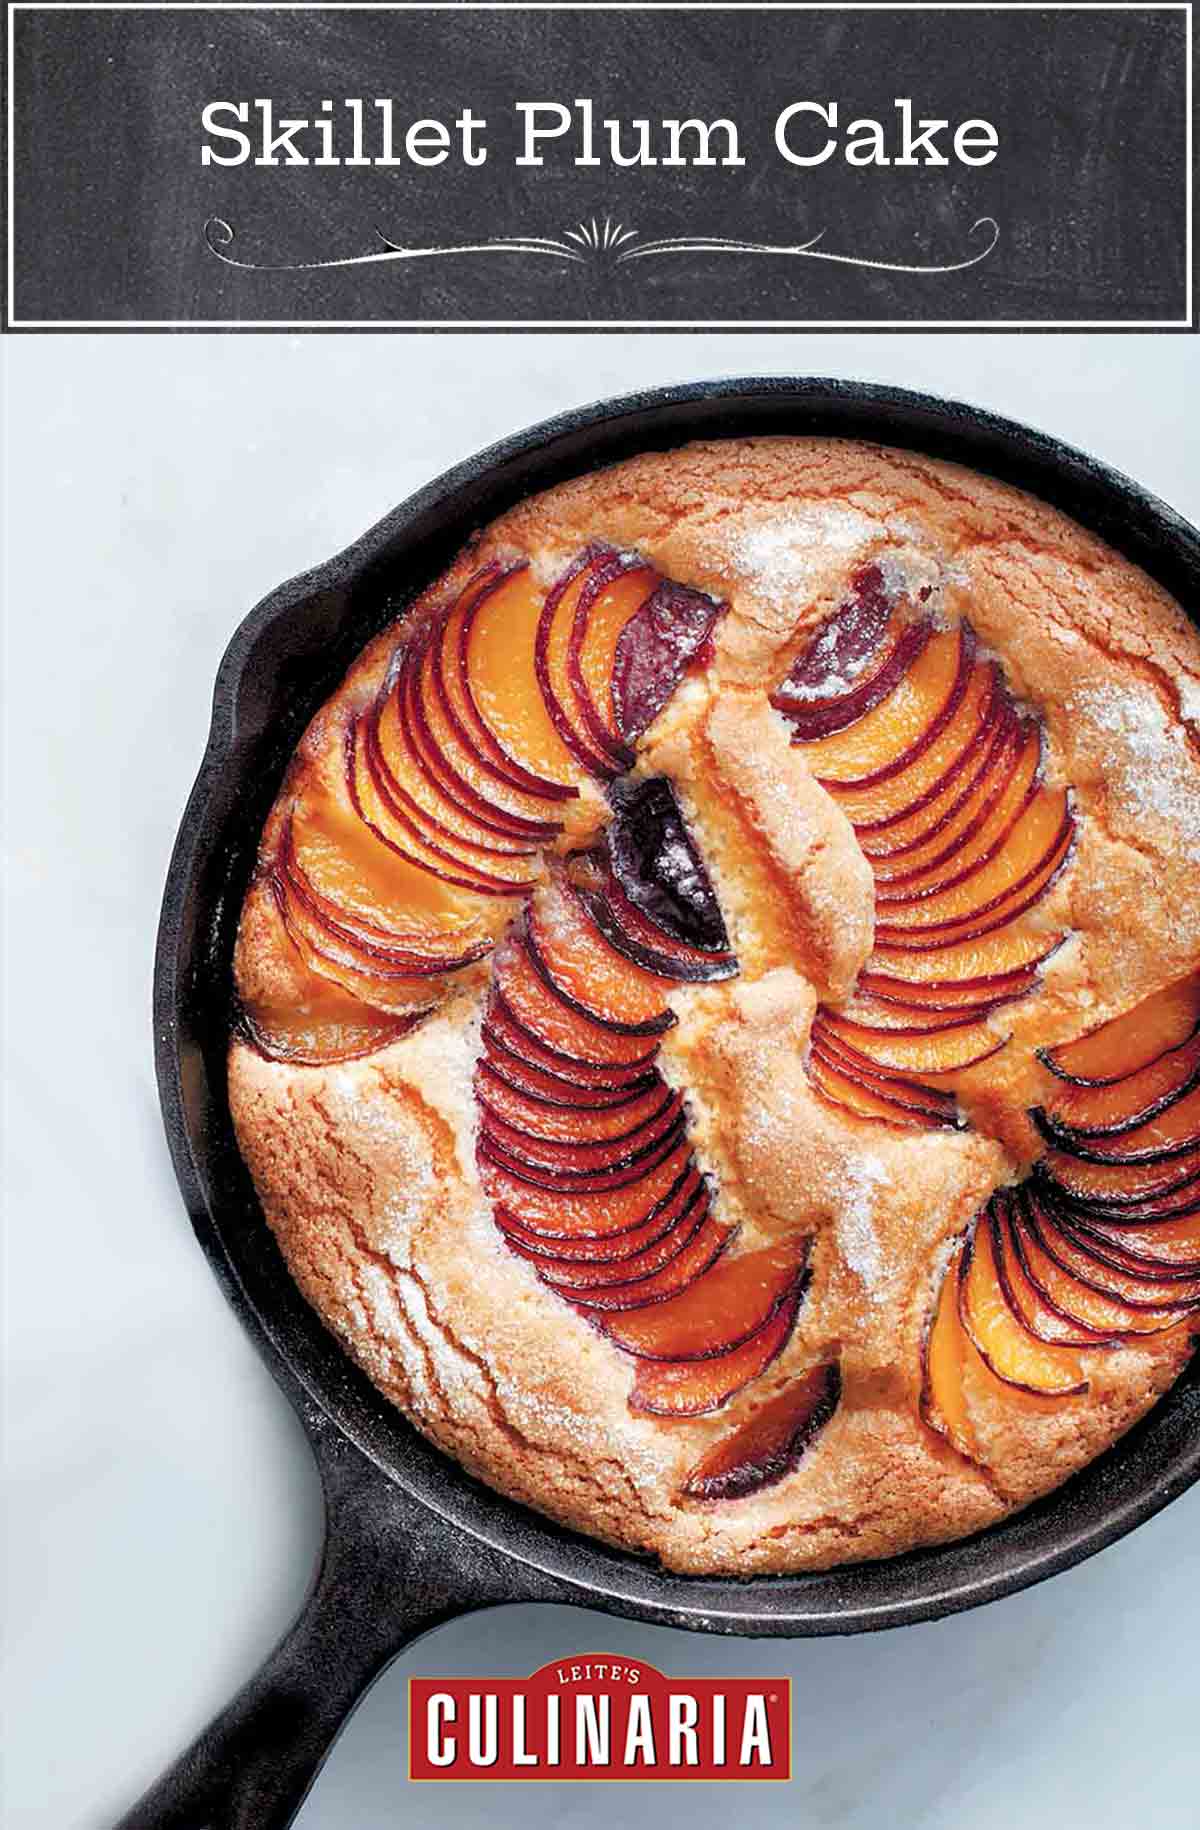 A cast-iron skillet plum cake with slices of fanned out plums baked in.